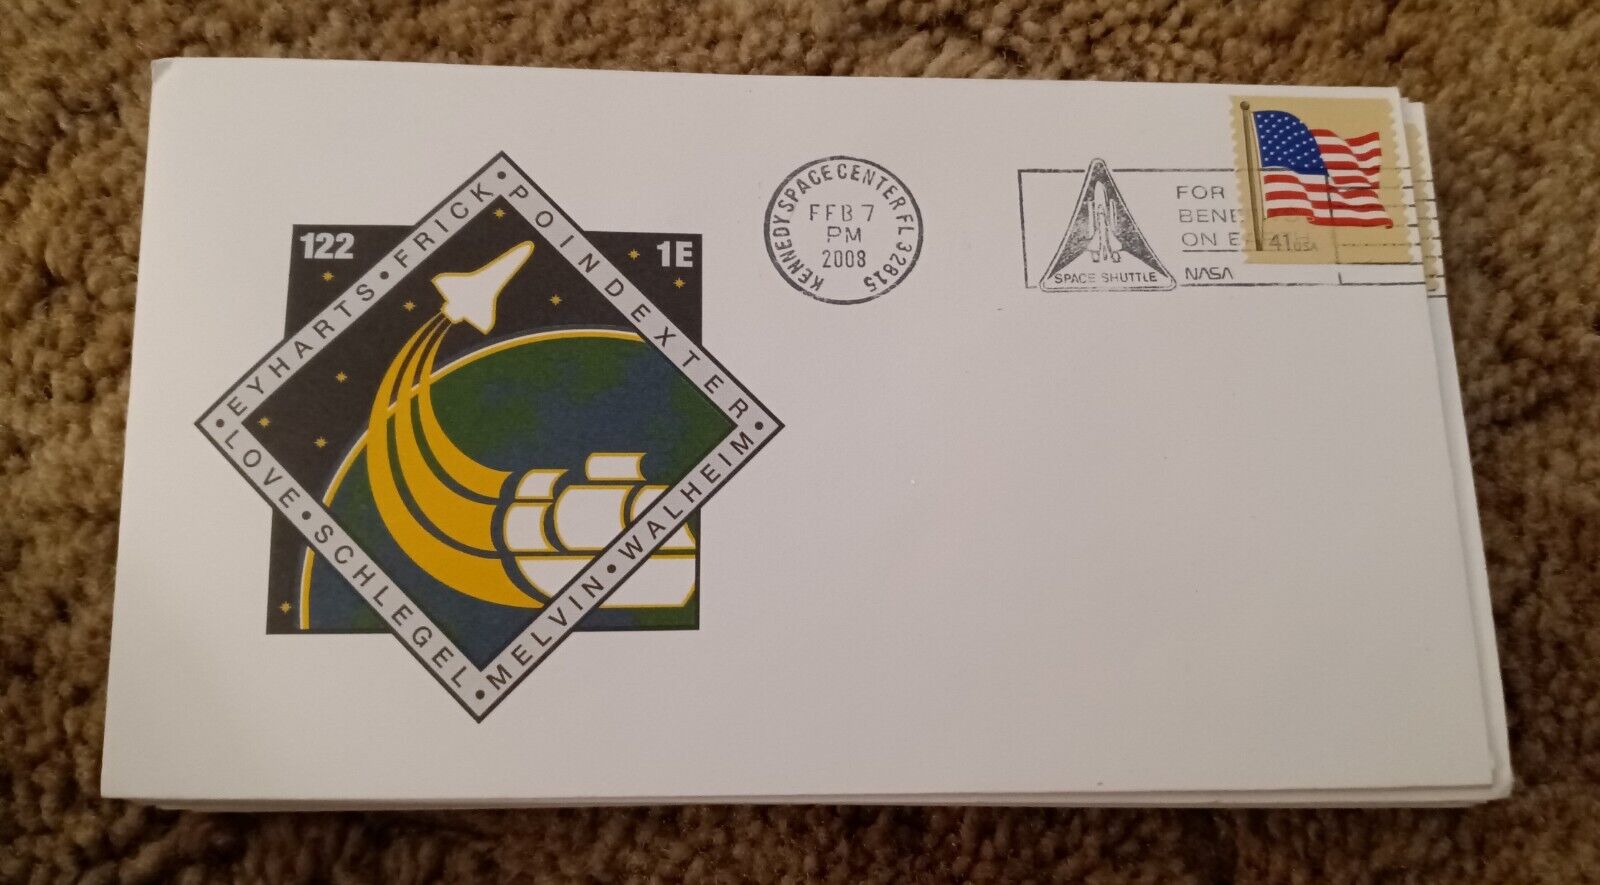 HUGE Lot of (25) 2008 NASA Space Shuttle Atlantis STS-122 First Day Covers FDC